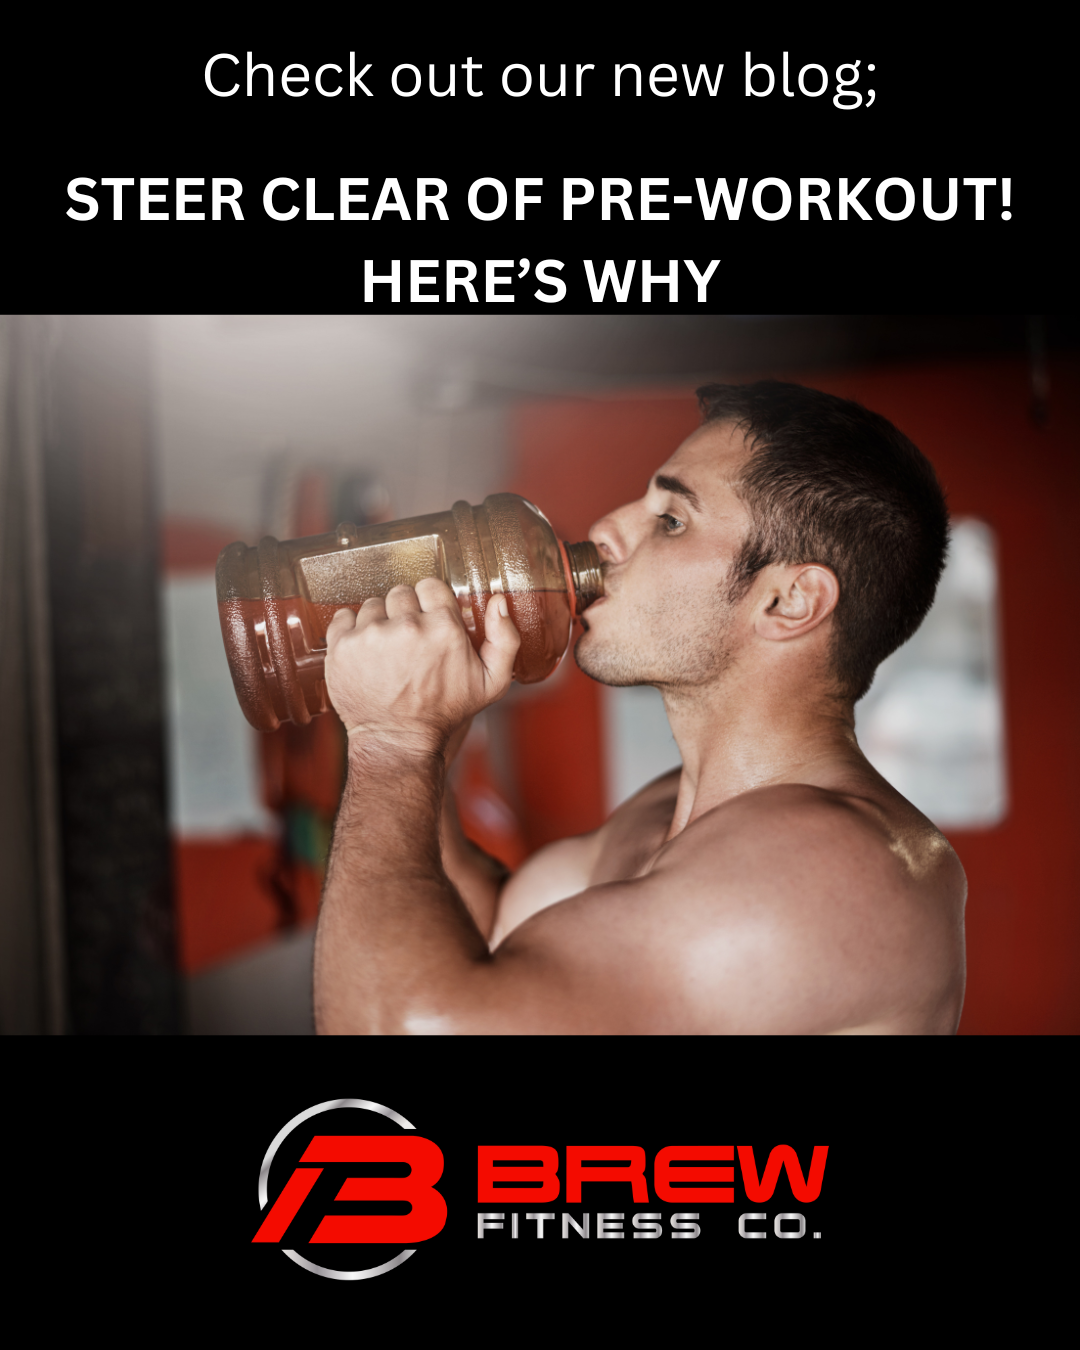 STEER CLEAR OF PRE-WORKOUT! HERE’S WHY